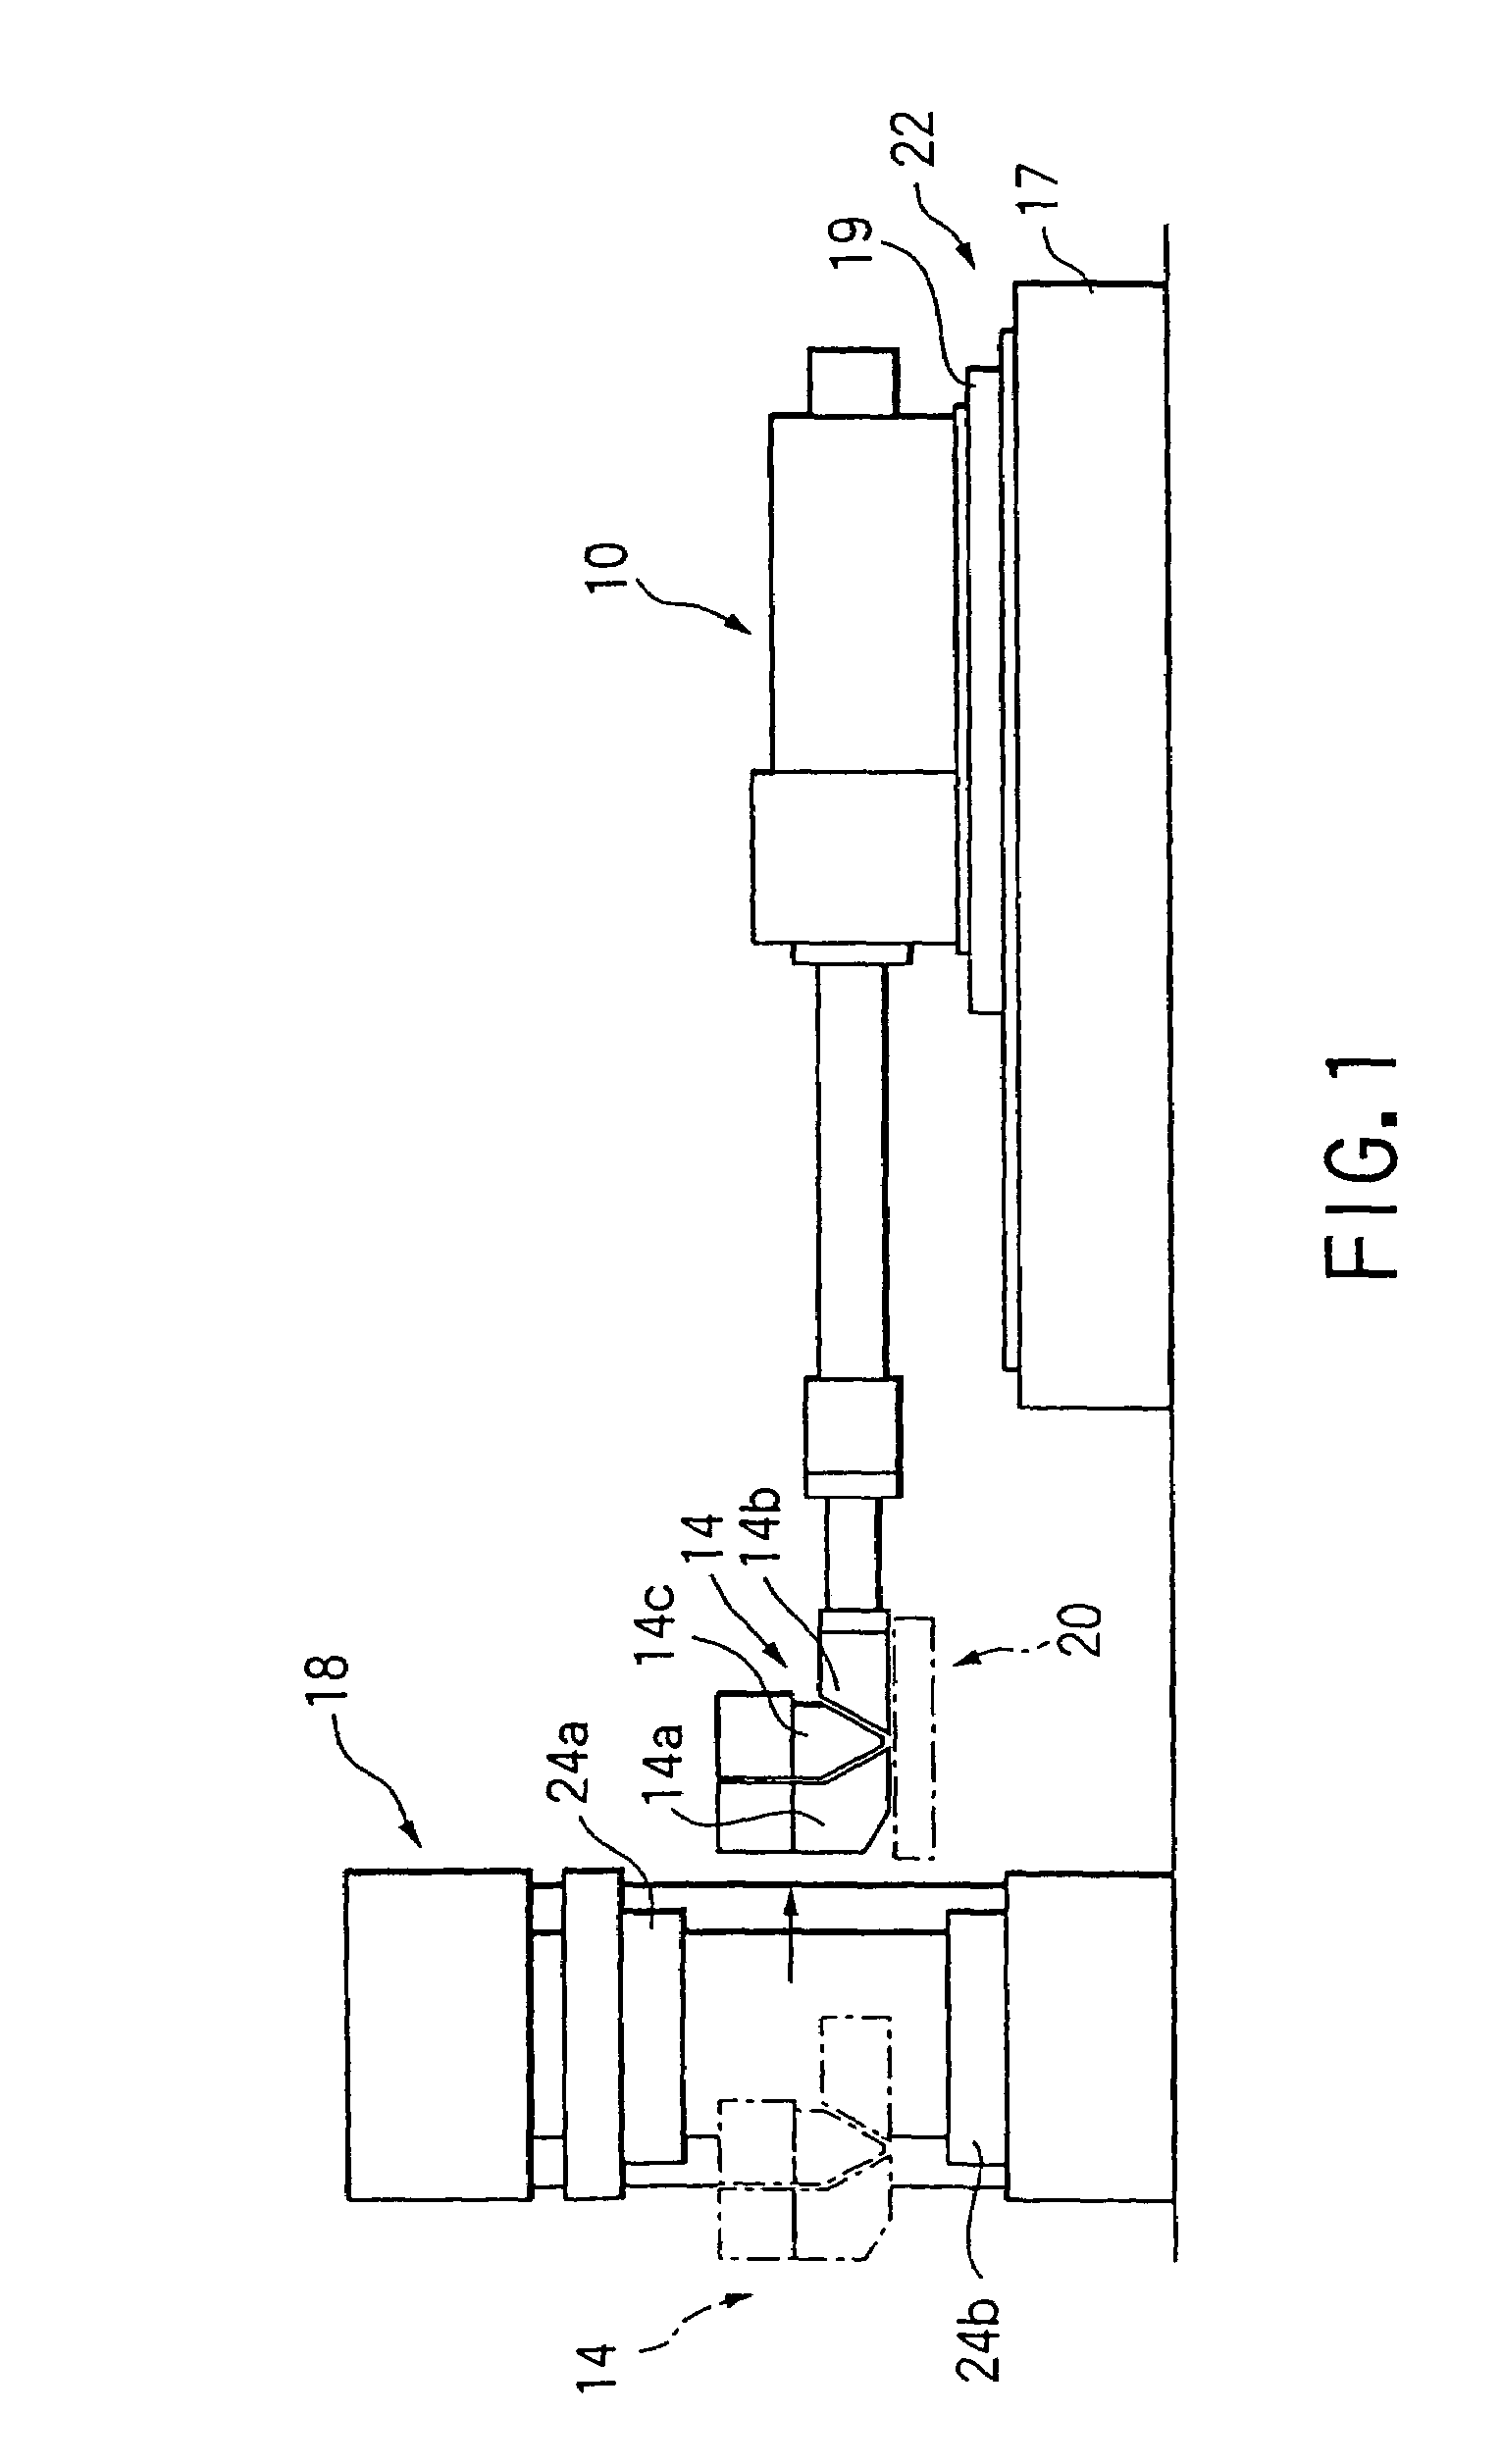 Method of manufacturing a molded multilayer article